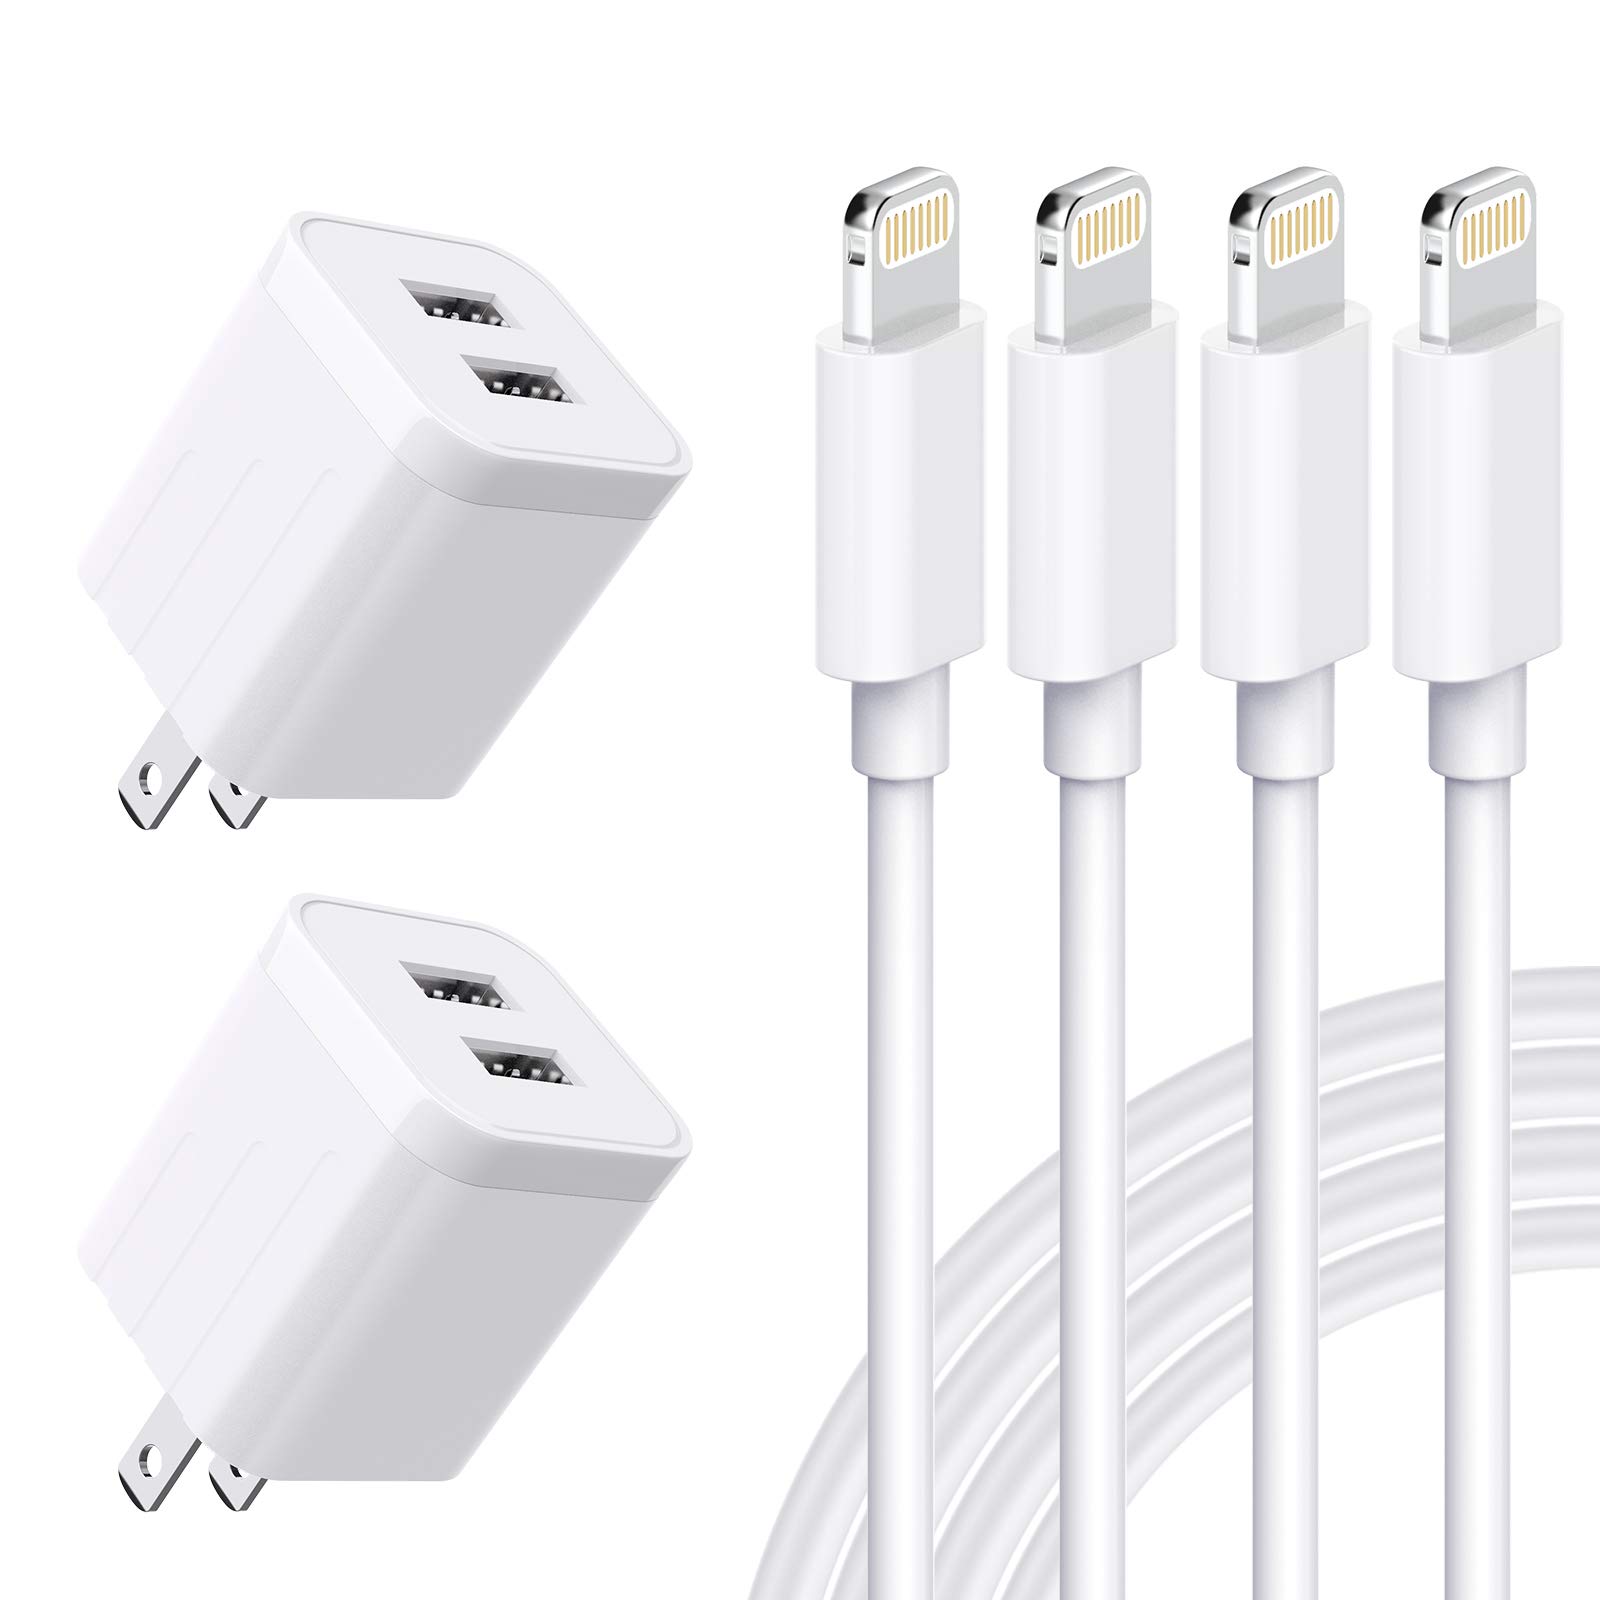 Mua USB Wall Charger, [Apple MFi Certified] iPhone Charger Lightning Cable  6FT(4PACK) Fast Charging Data Sync Cords Dual Port USB Plug Compatible with  iPhone 12/mini/Pro/Max/11/Pro/Xs/XR/X/8/7/Plus trên Amazon Mỹ chính hãng  2023 |